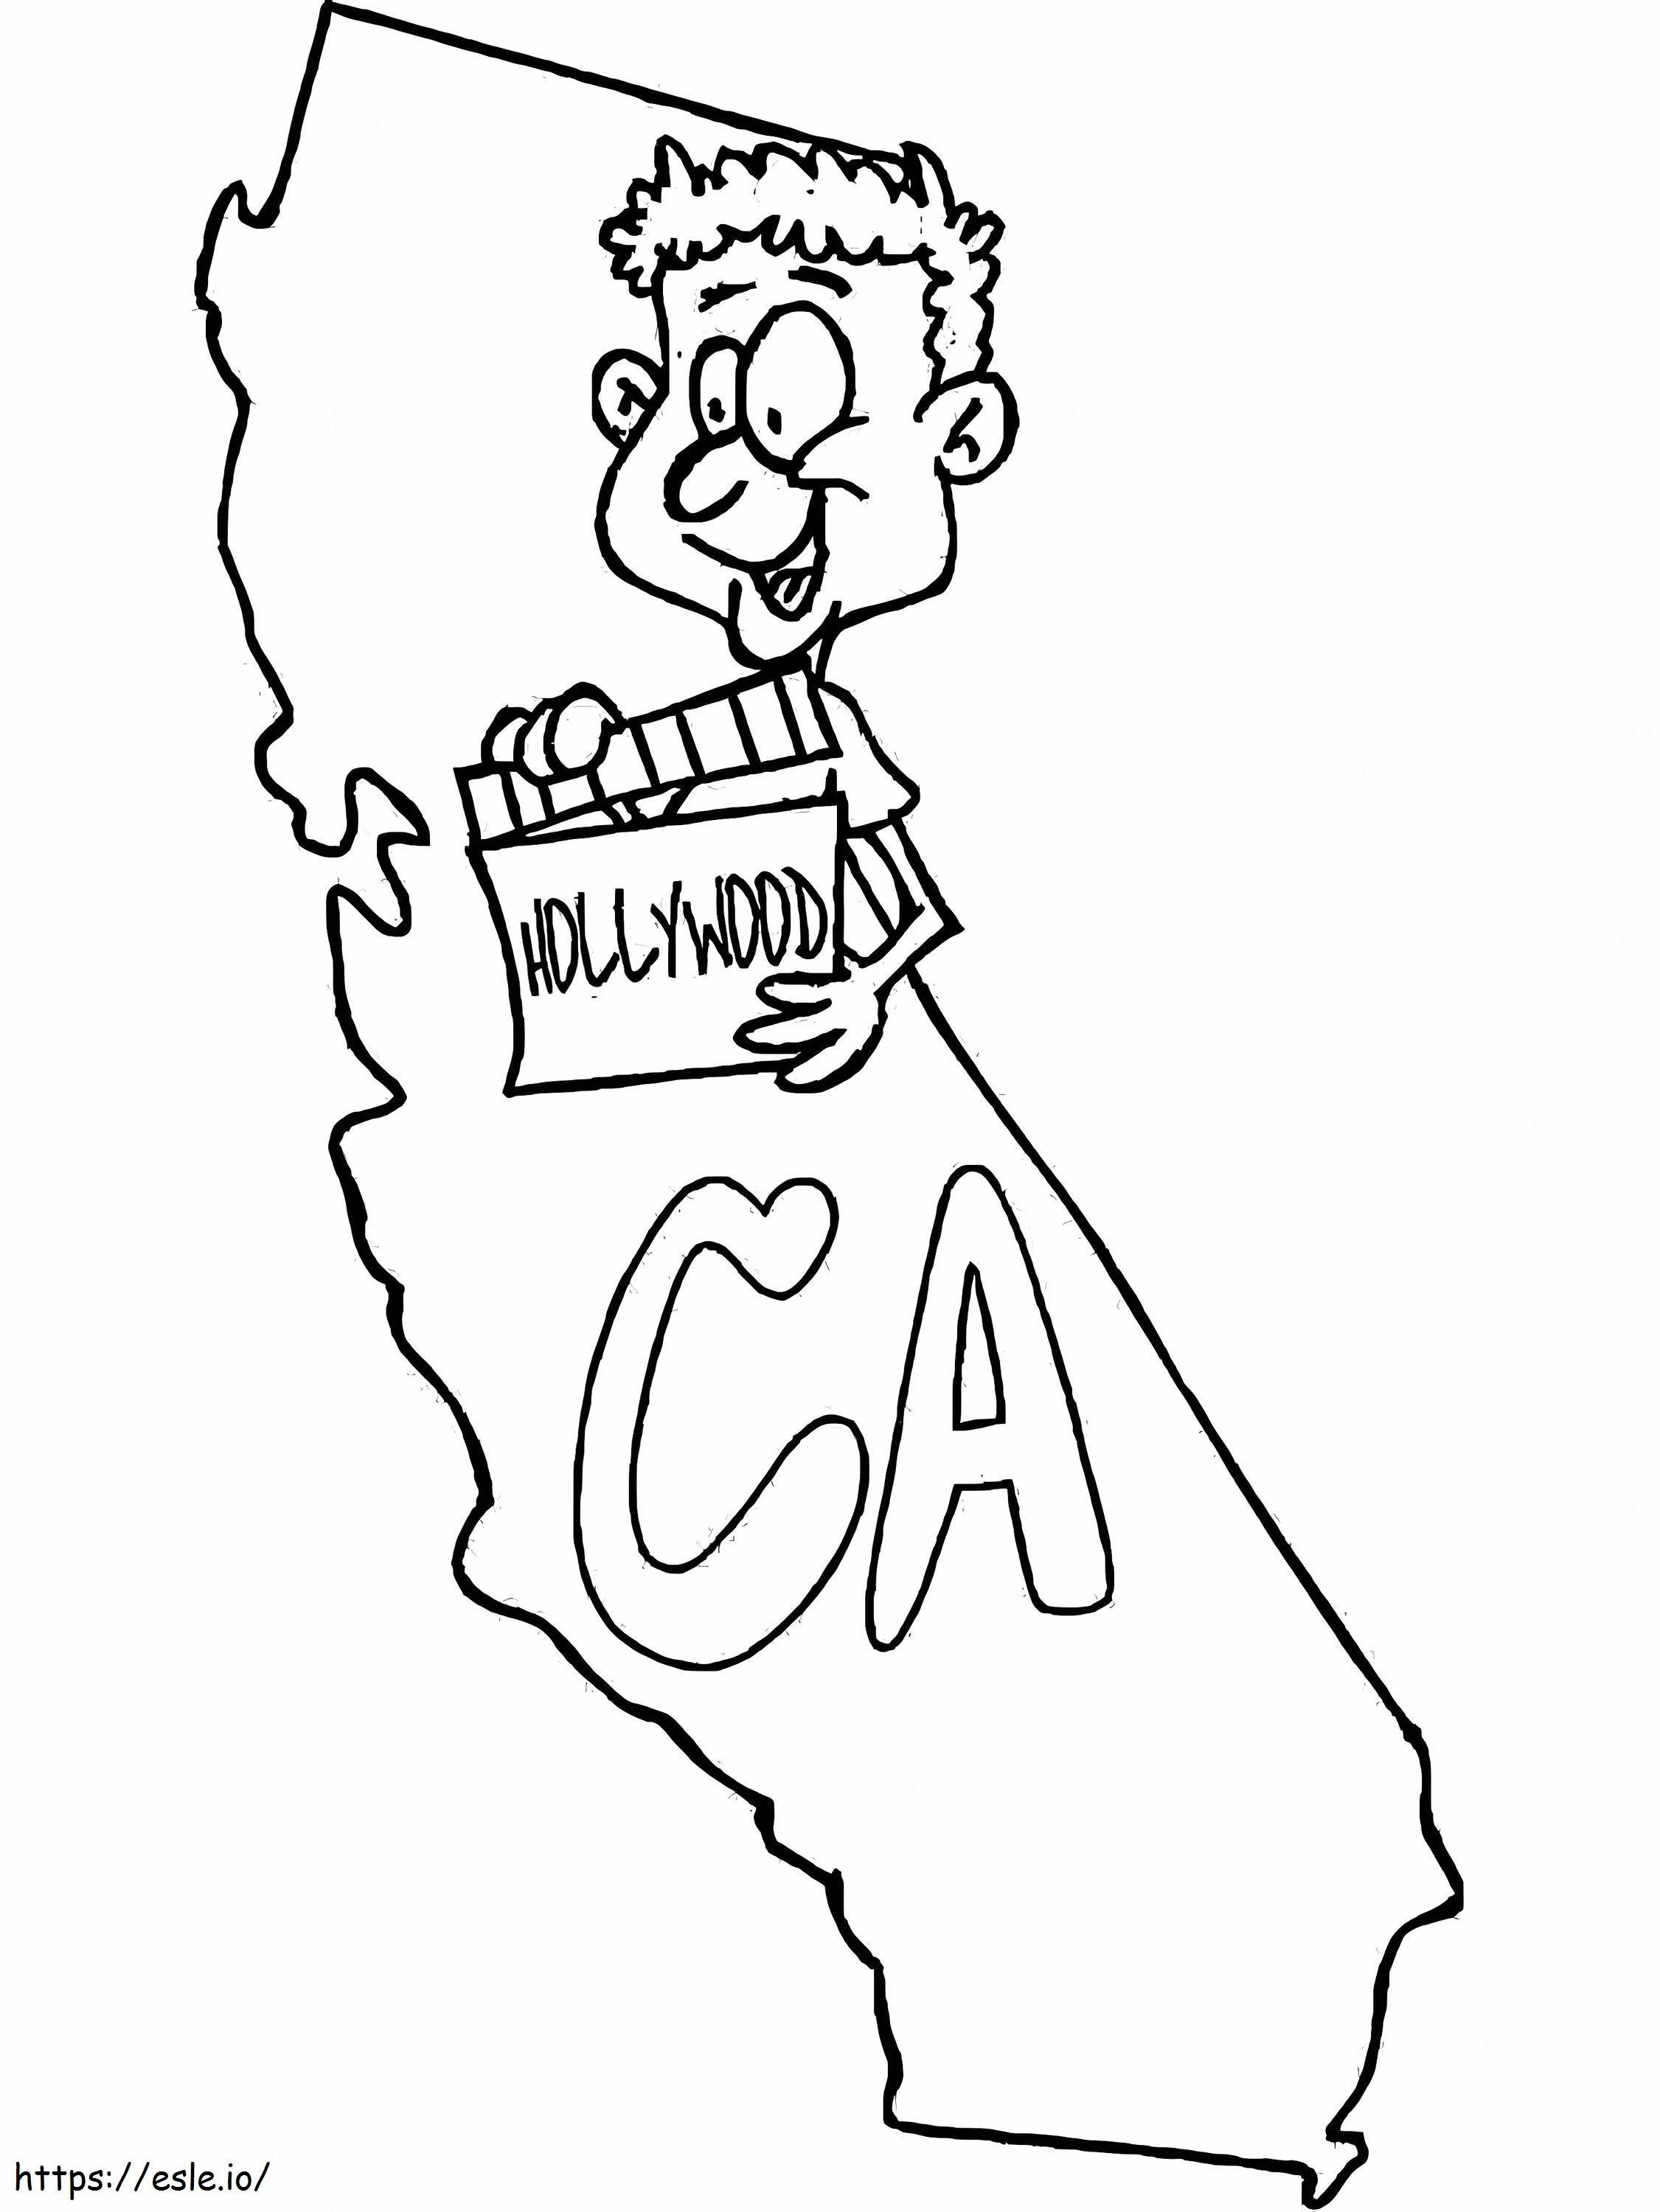 Printable California Map coloring page